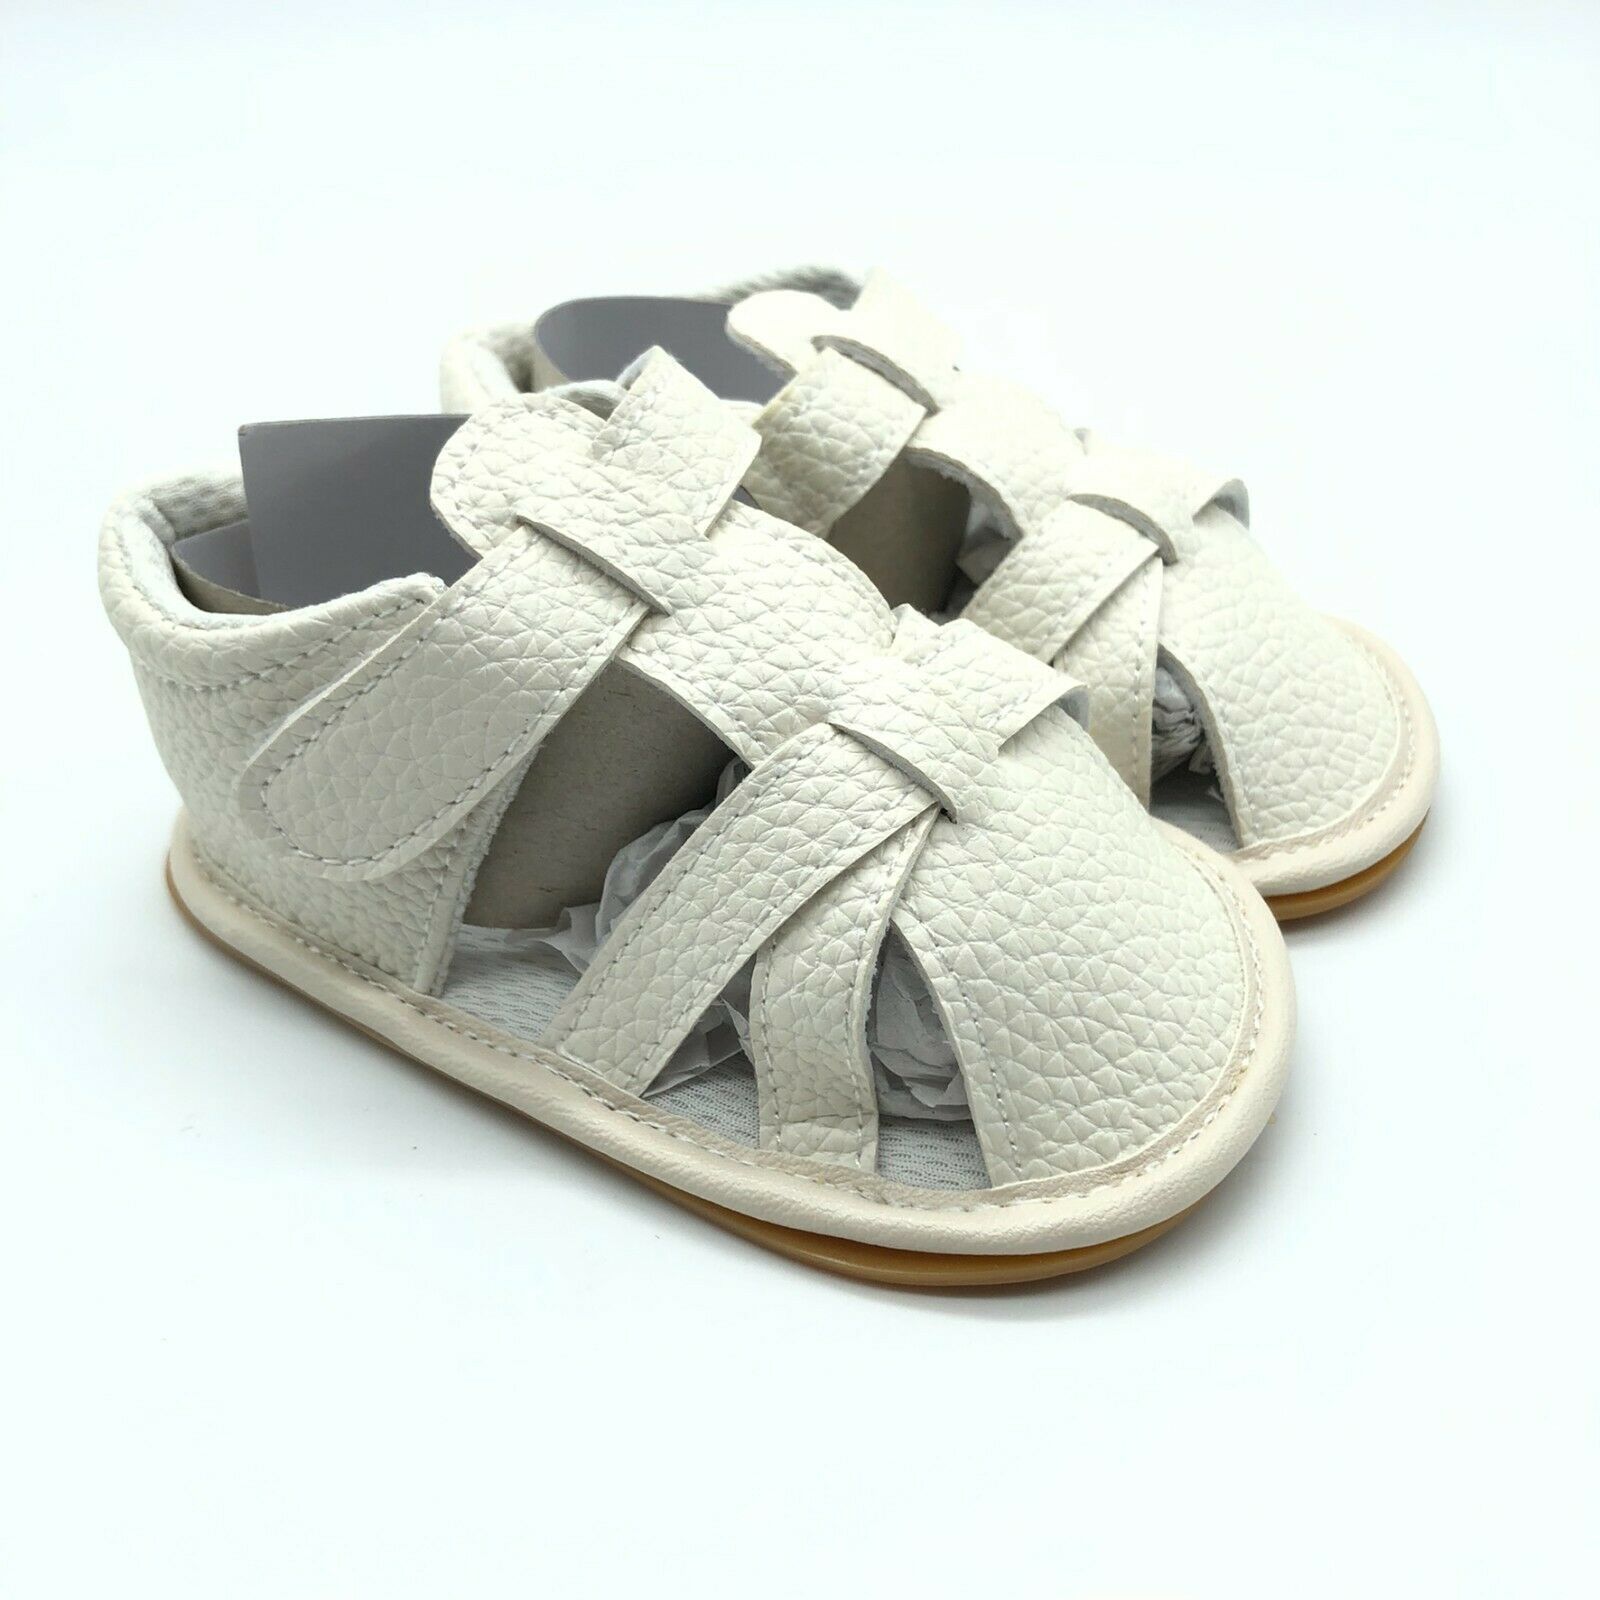 Toddler Boys Girls Fisherman Sandals Faux Leather Hook & Loop White 9-12 Months - $9.74